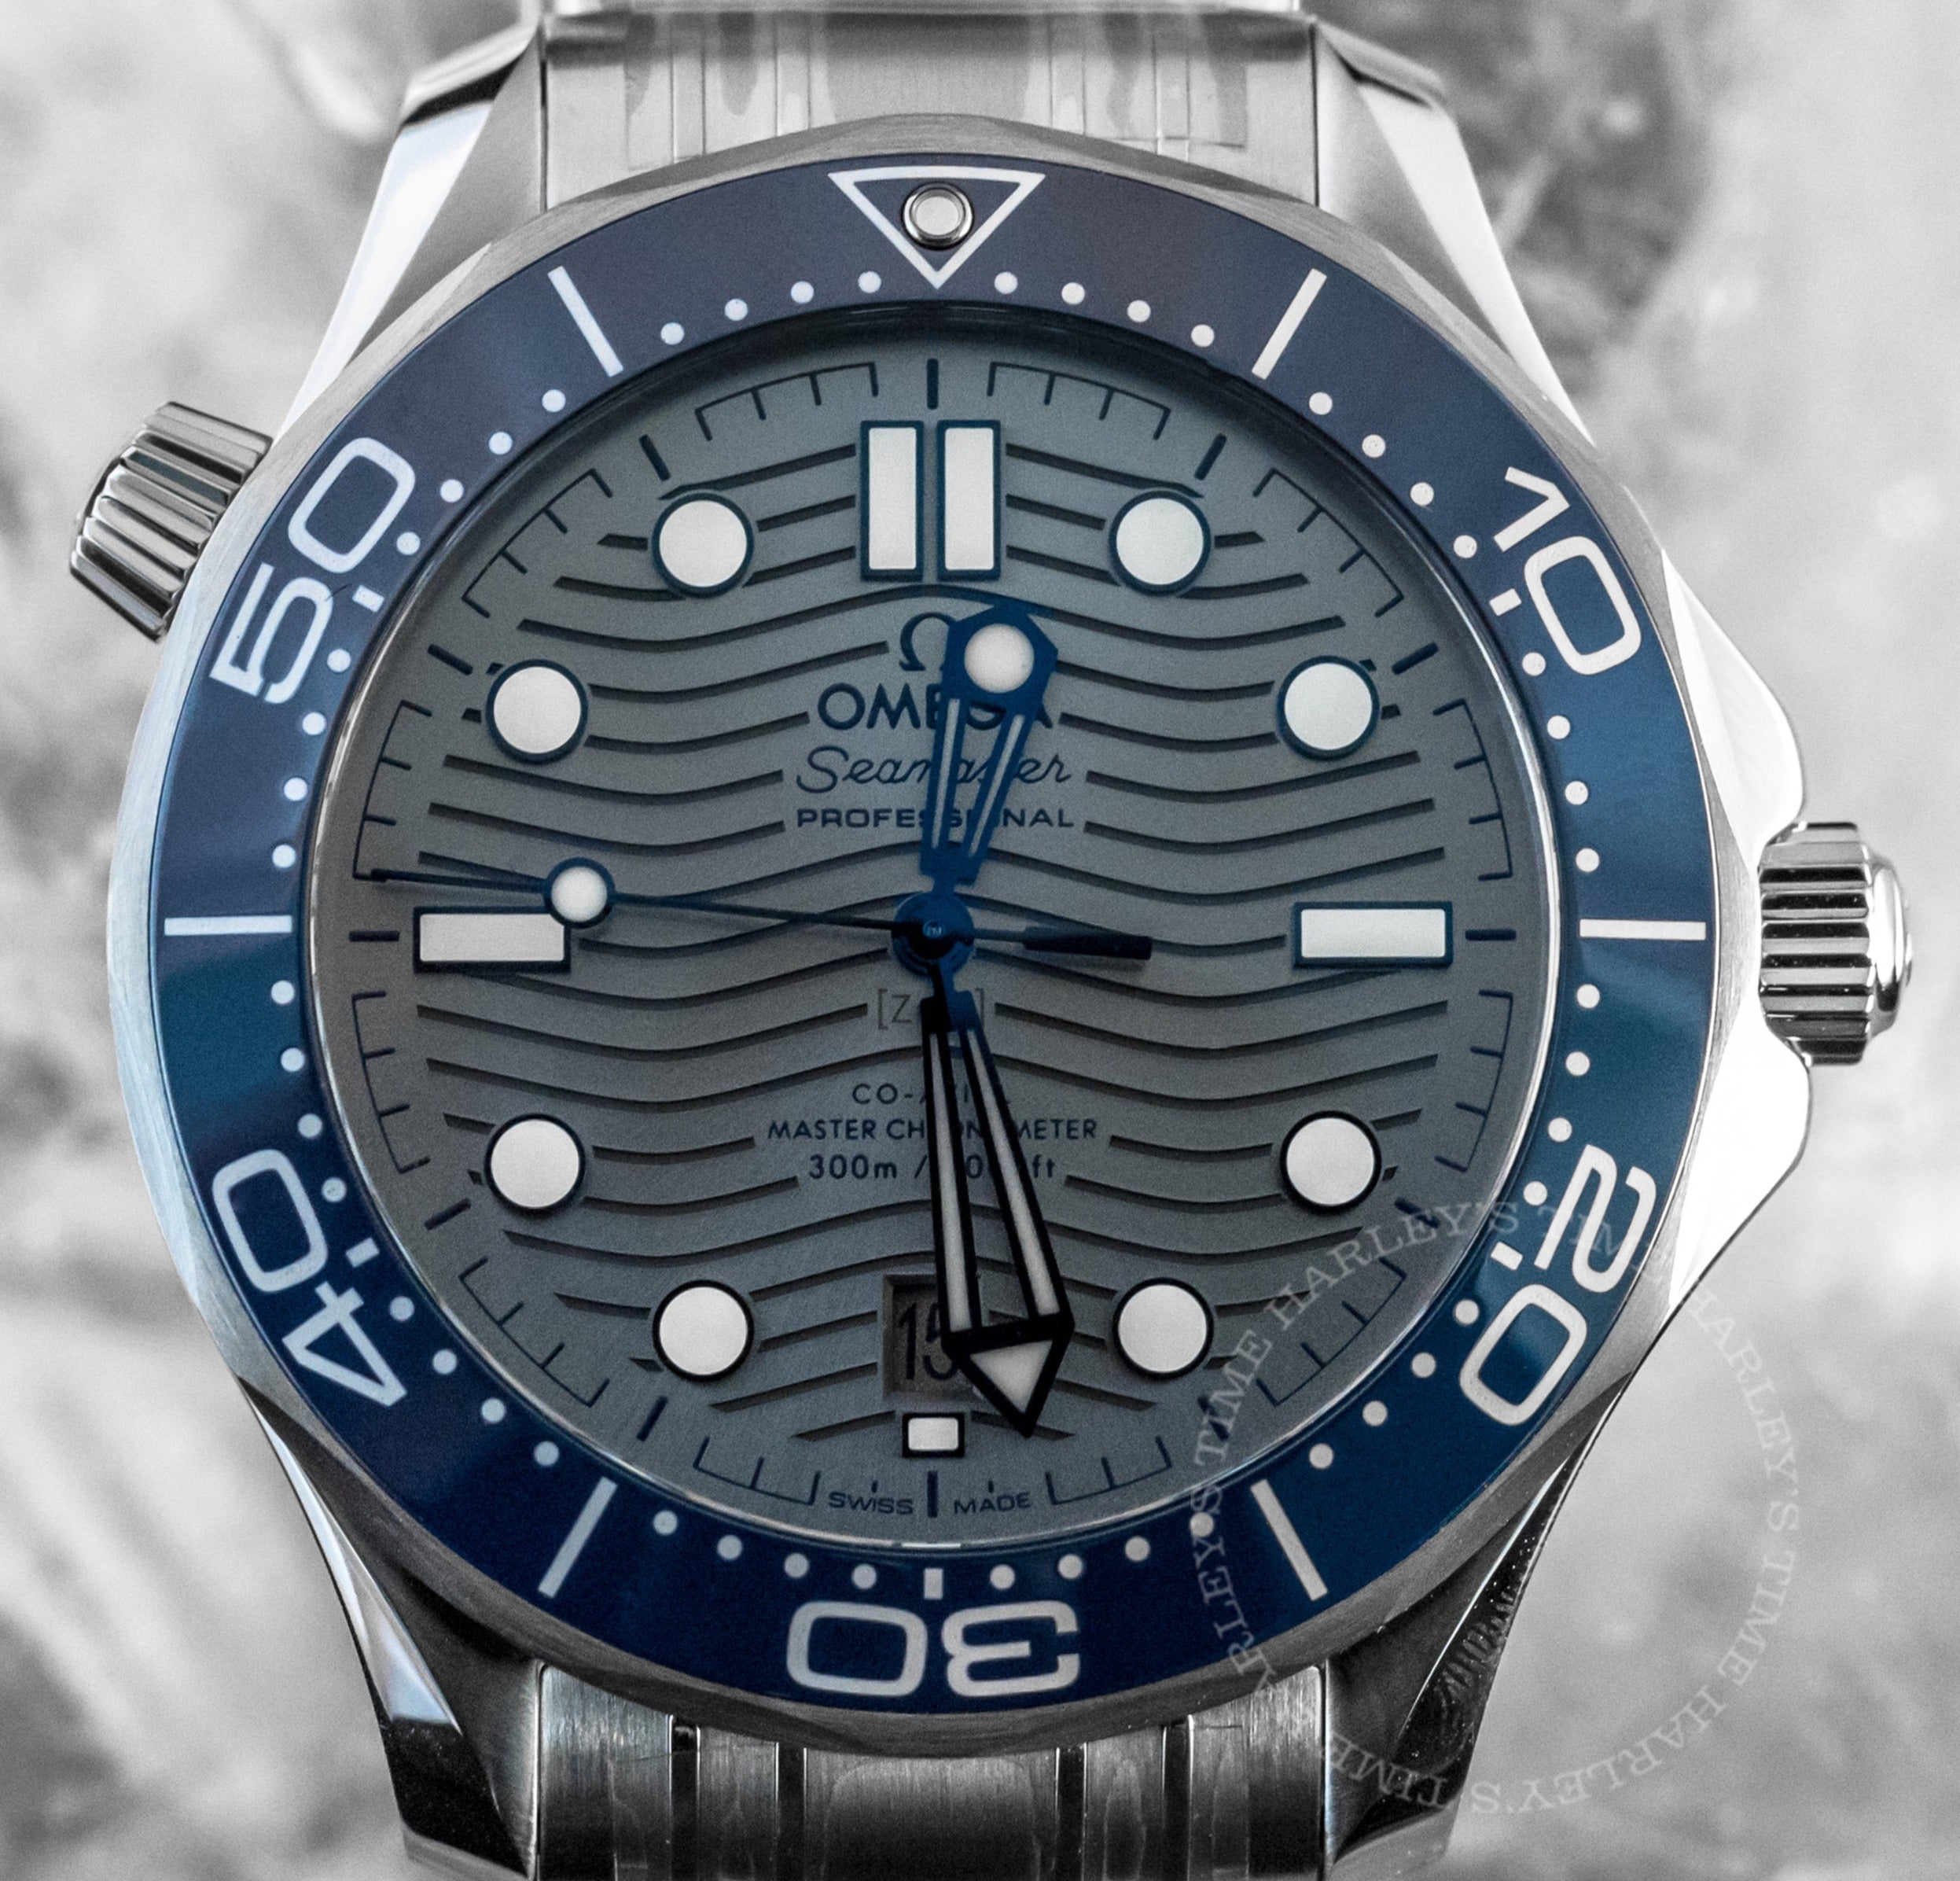 Omega - Seamaster 300m Co‑axial Master Chronometer - 210.32.42.20.01.001 |  Art Of Time